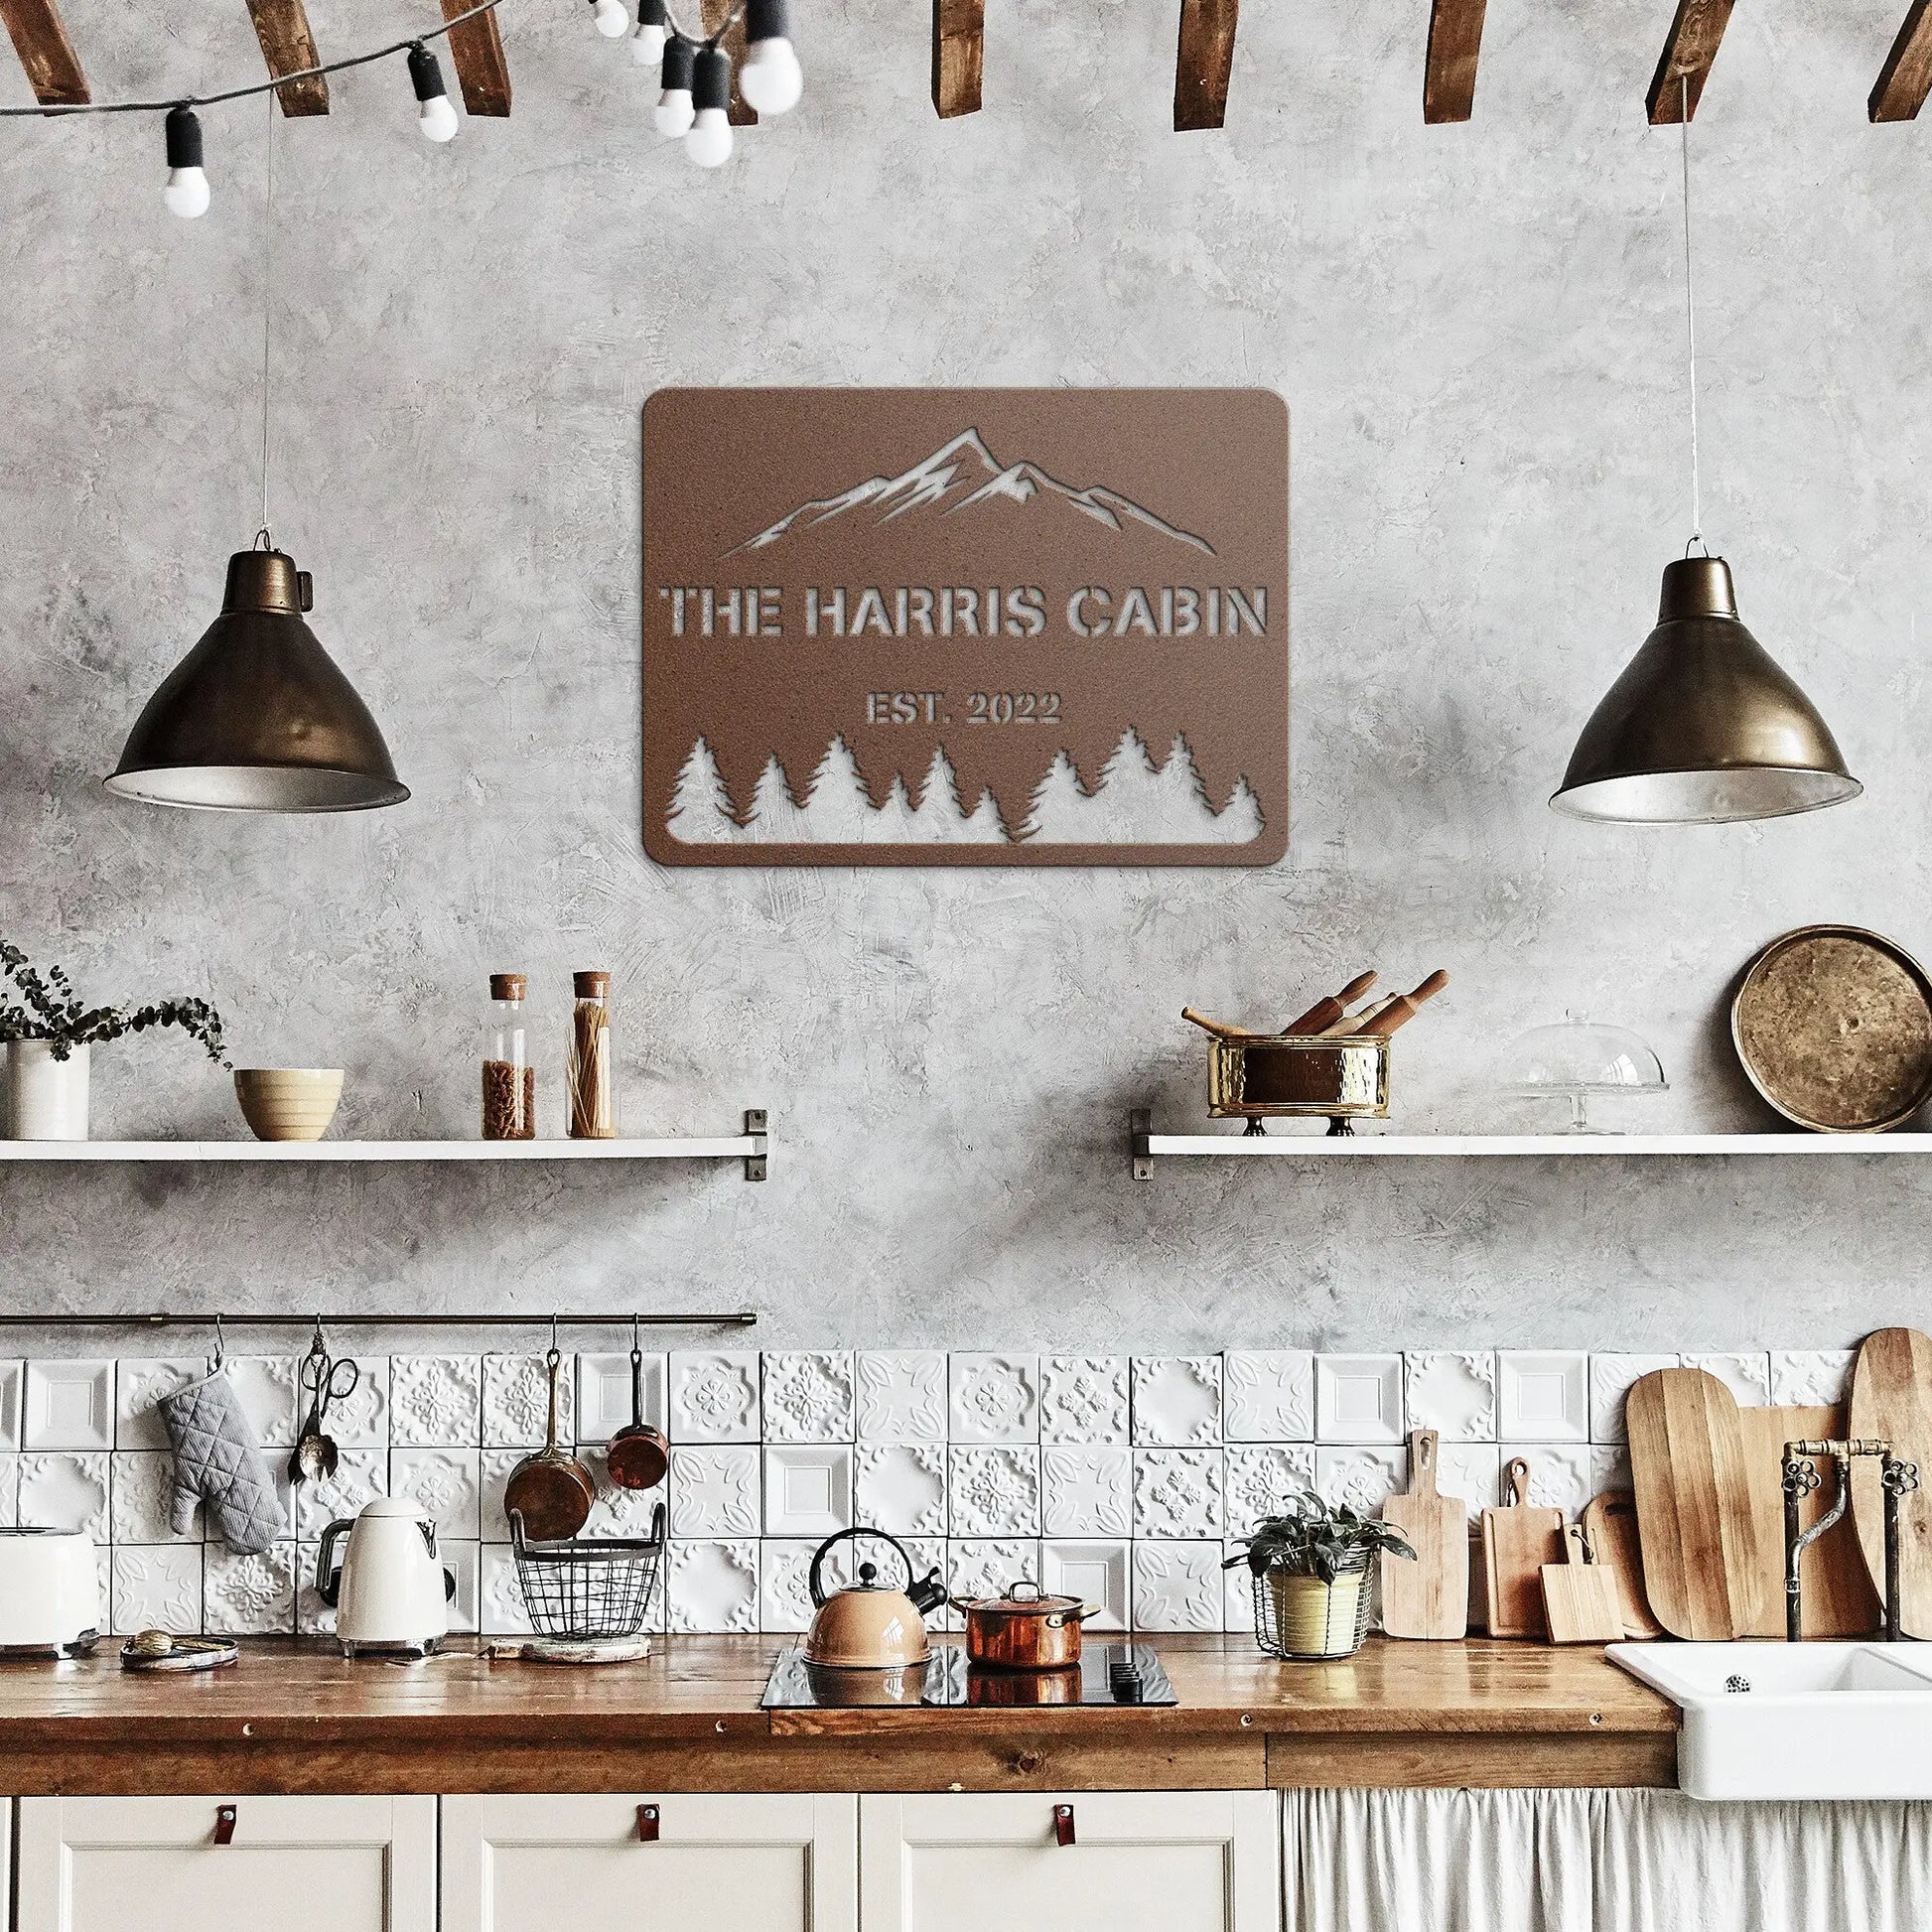 Wall Art Personalized Metal Cabin Sign - Mountain Wedding Established Date Wall Art - Personalized Gift - Wall Art - Home Decor - Home Gifts - Gifts teelaunch